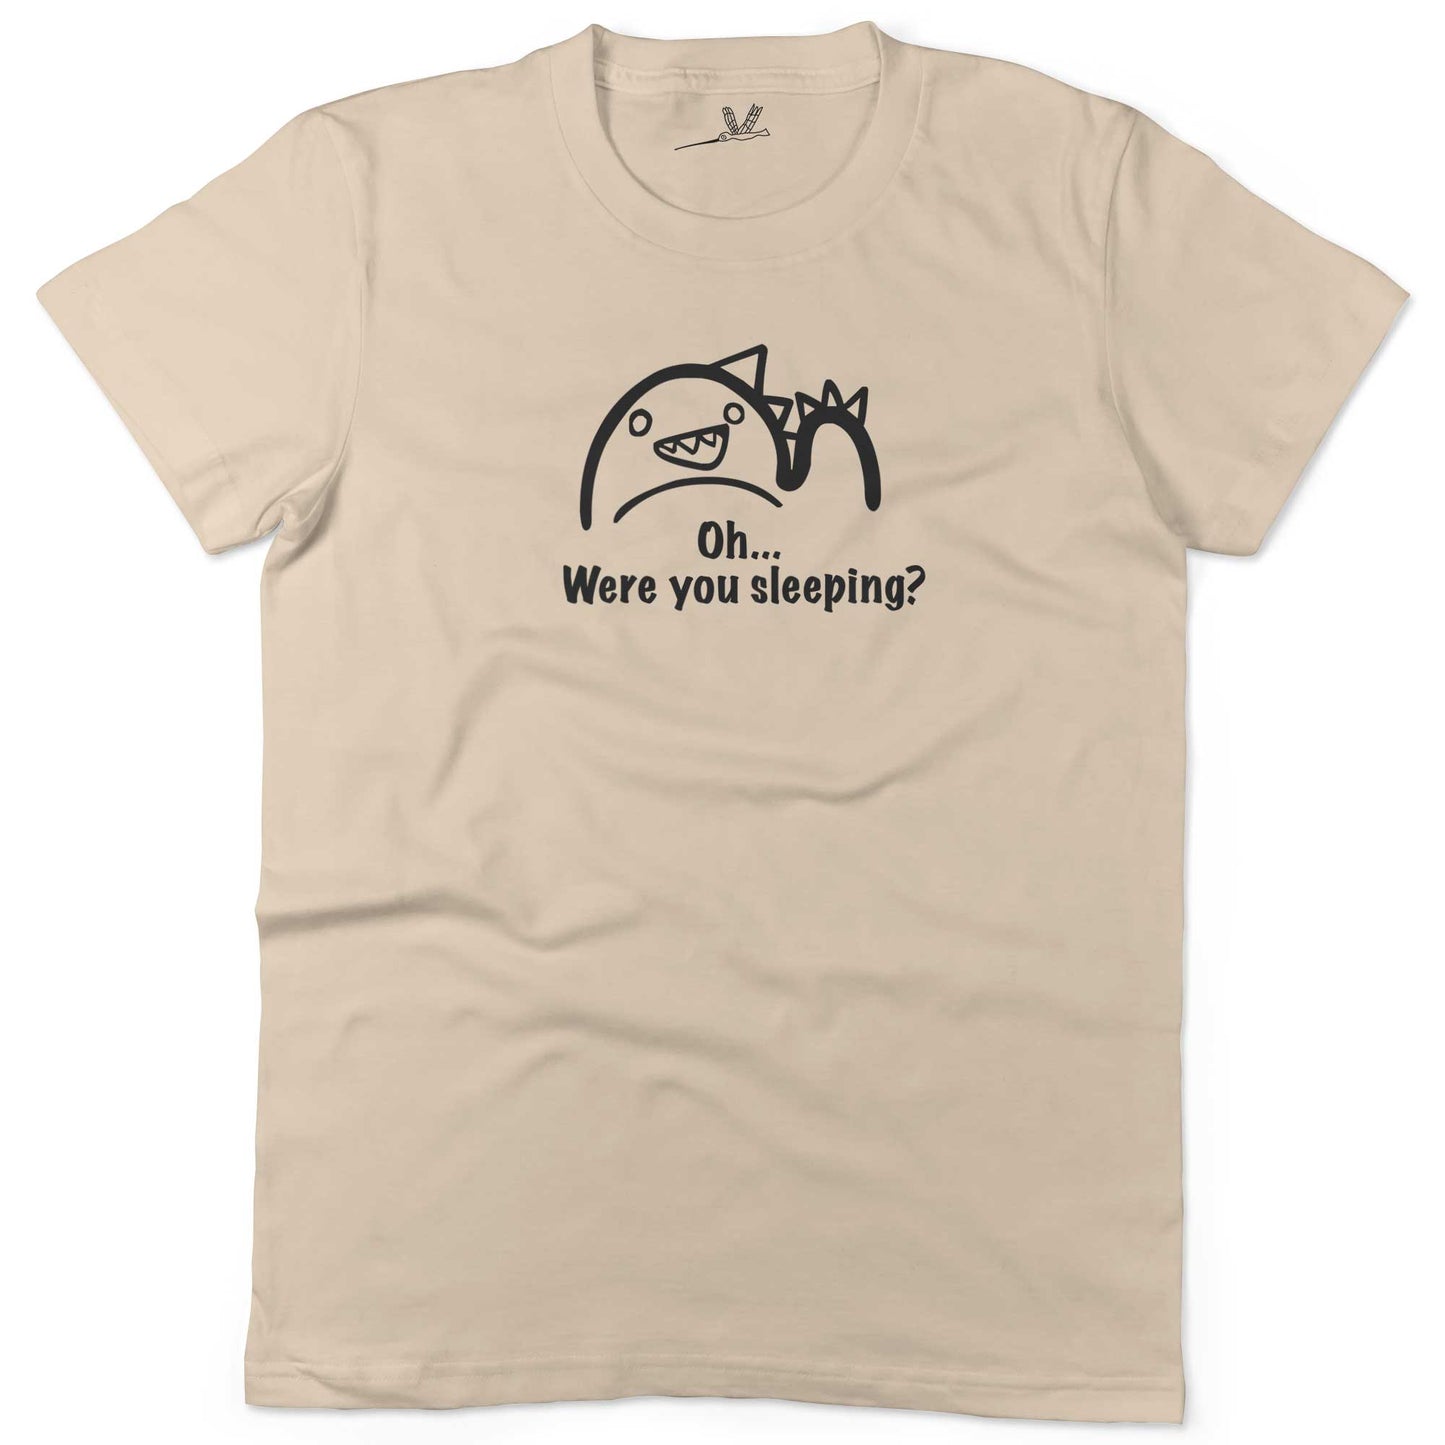 Oh...Were you sleeping? Women's or Unisex Funny T-shirt-Organic Natural-Woman